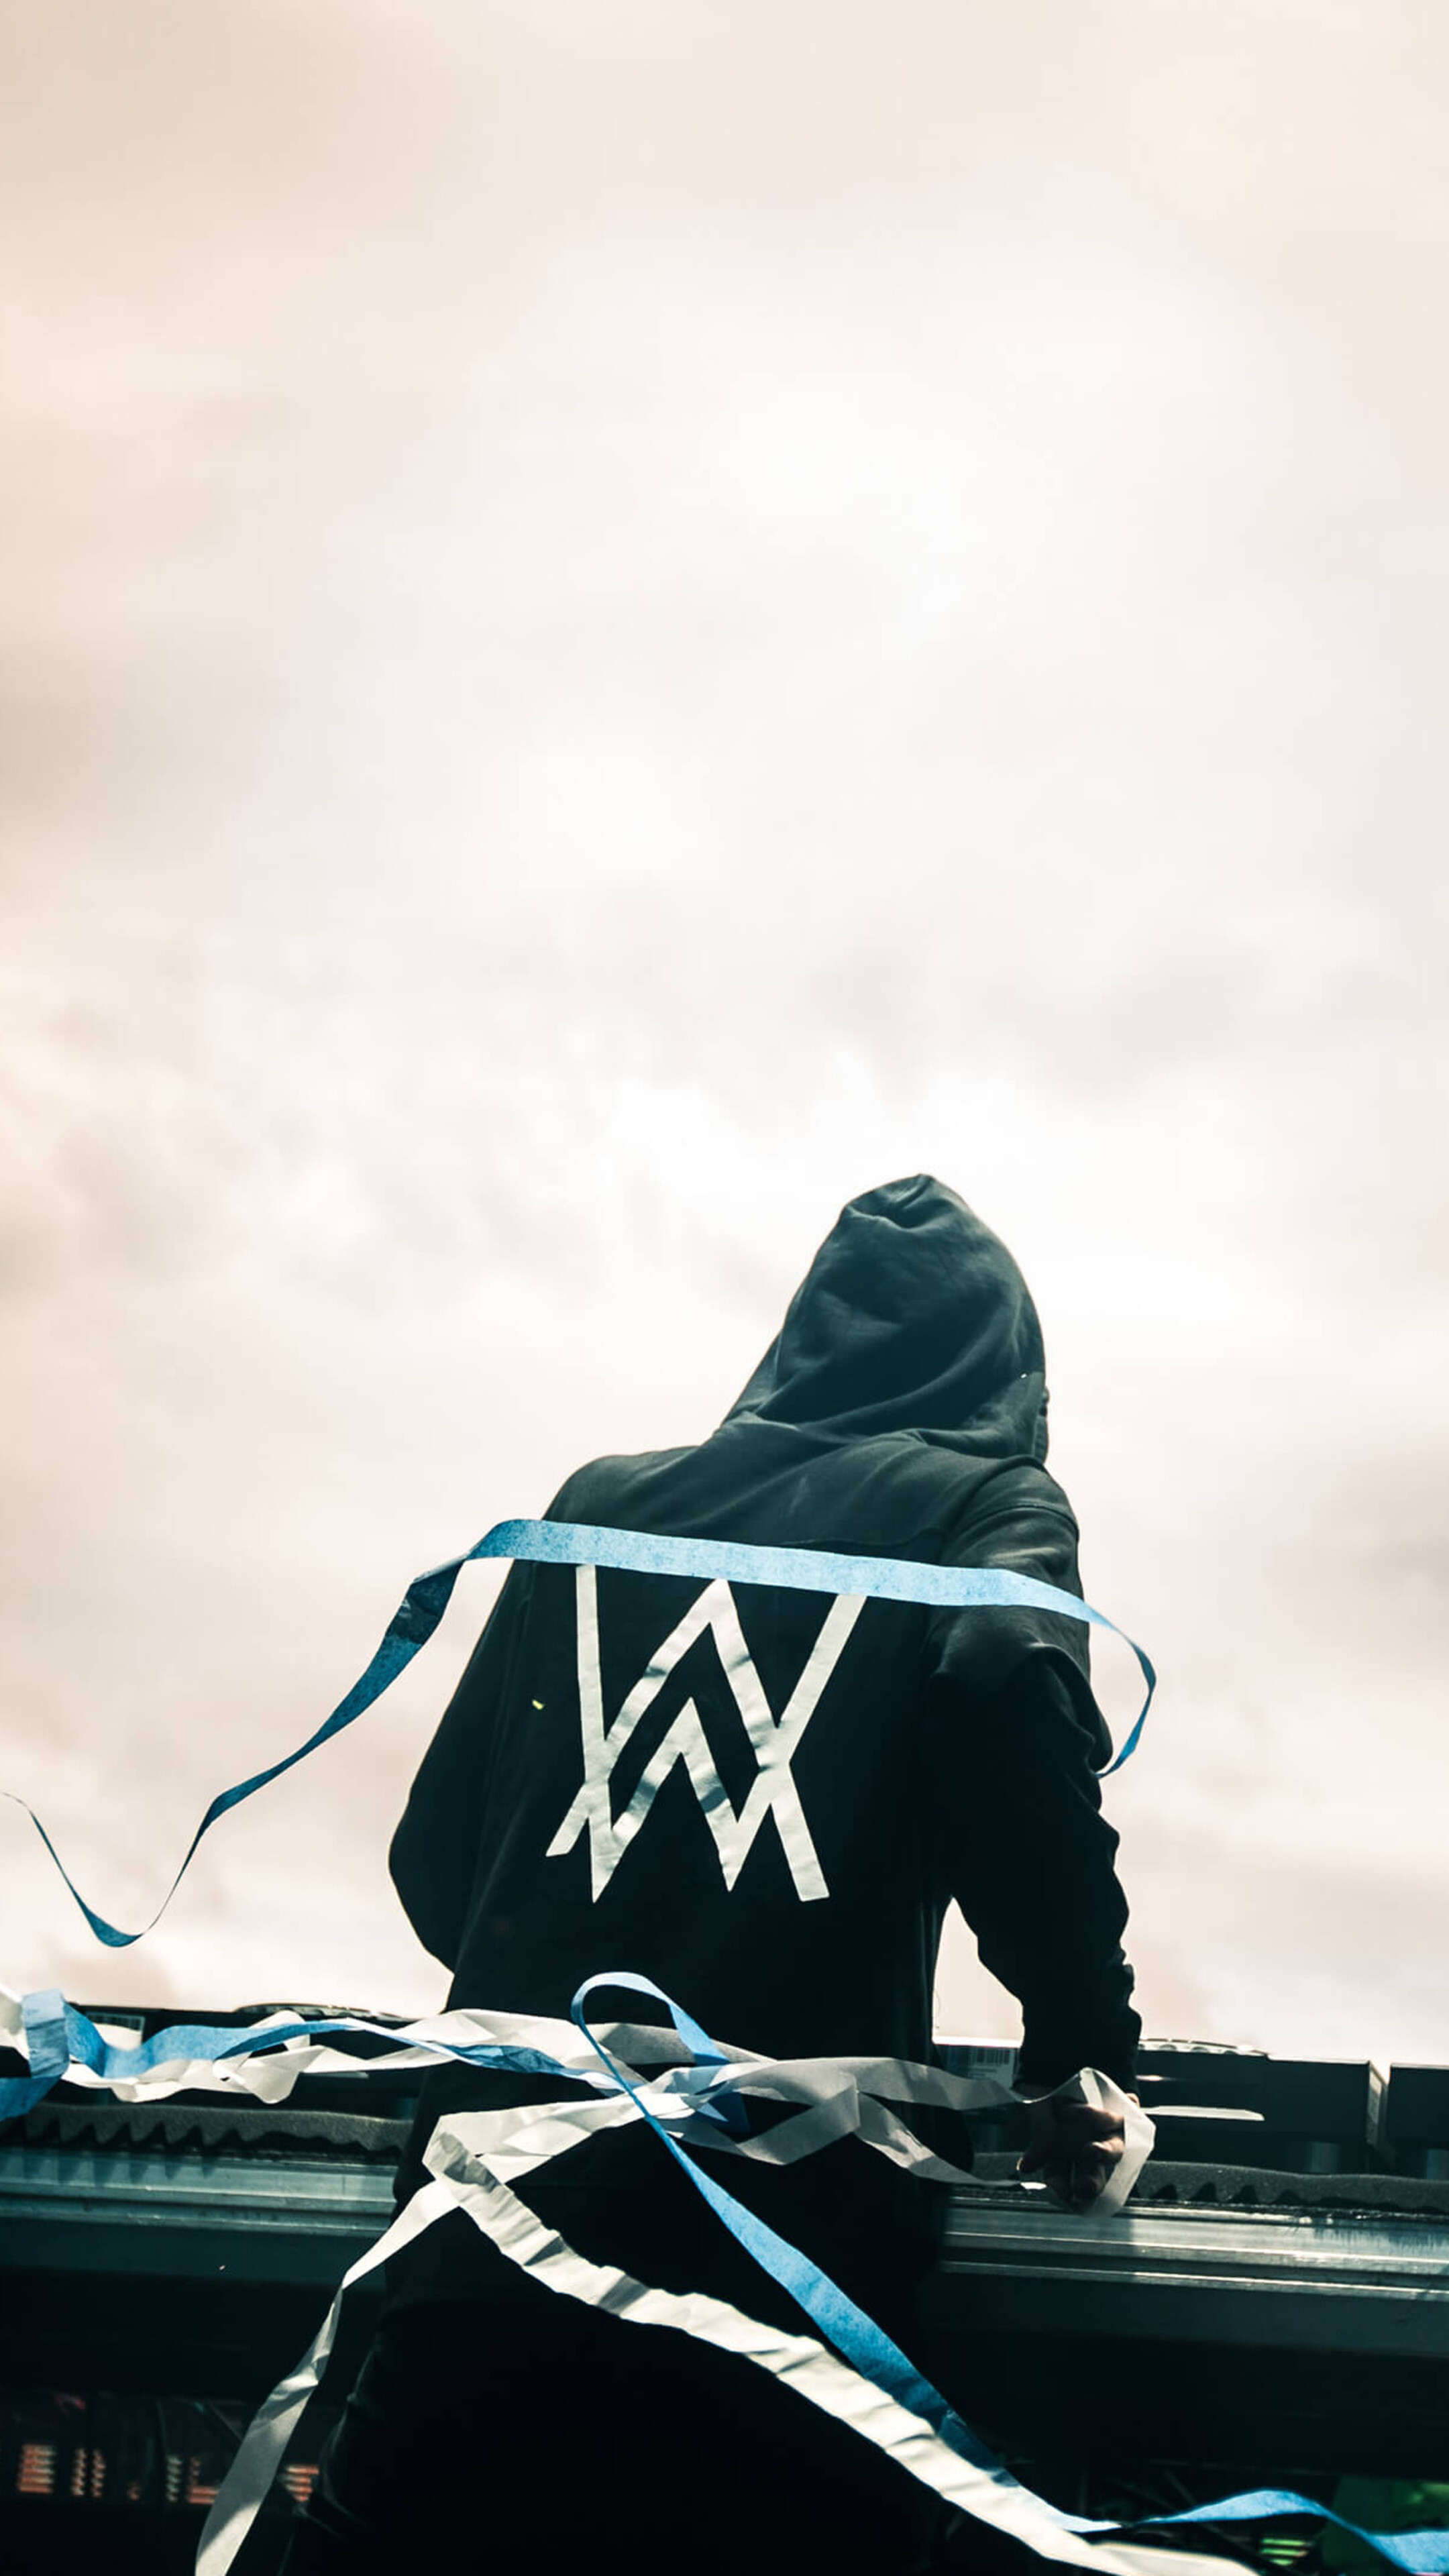 Alan Walker: “Sing Me to Sleep”, Topped iTunes charts in 7 countries. 2160x3840 4K Wallpaper.